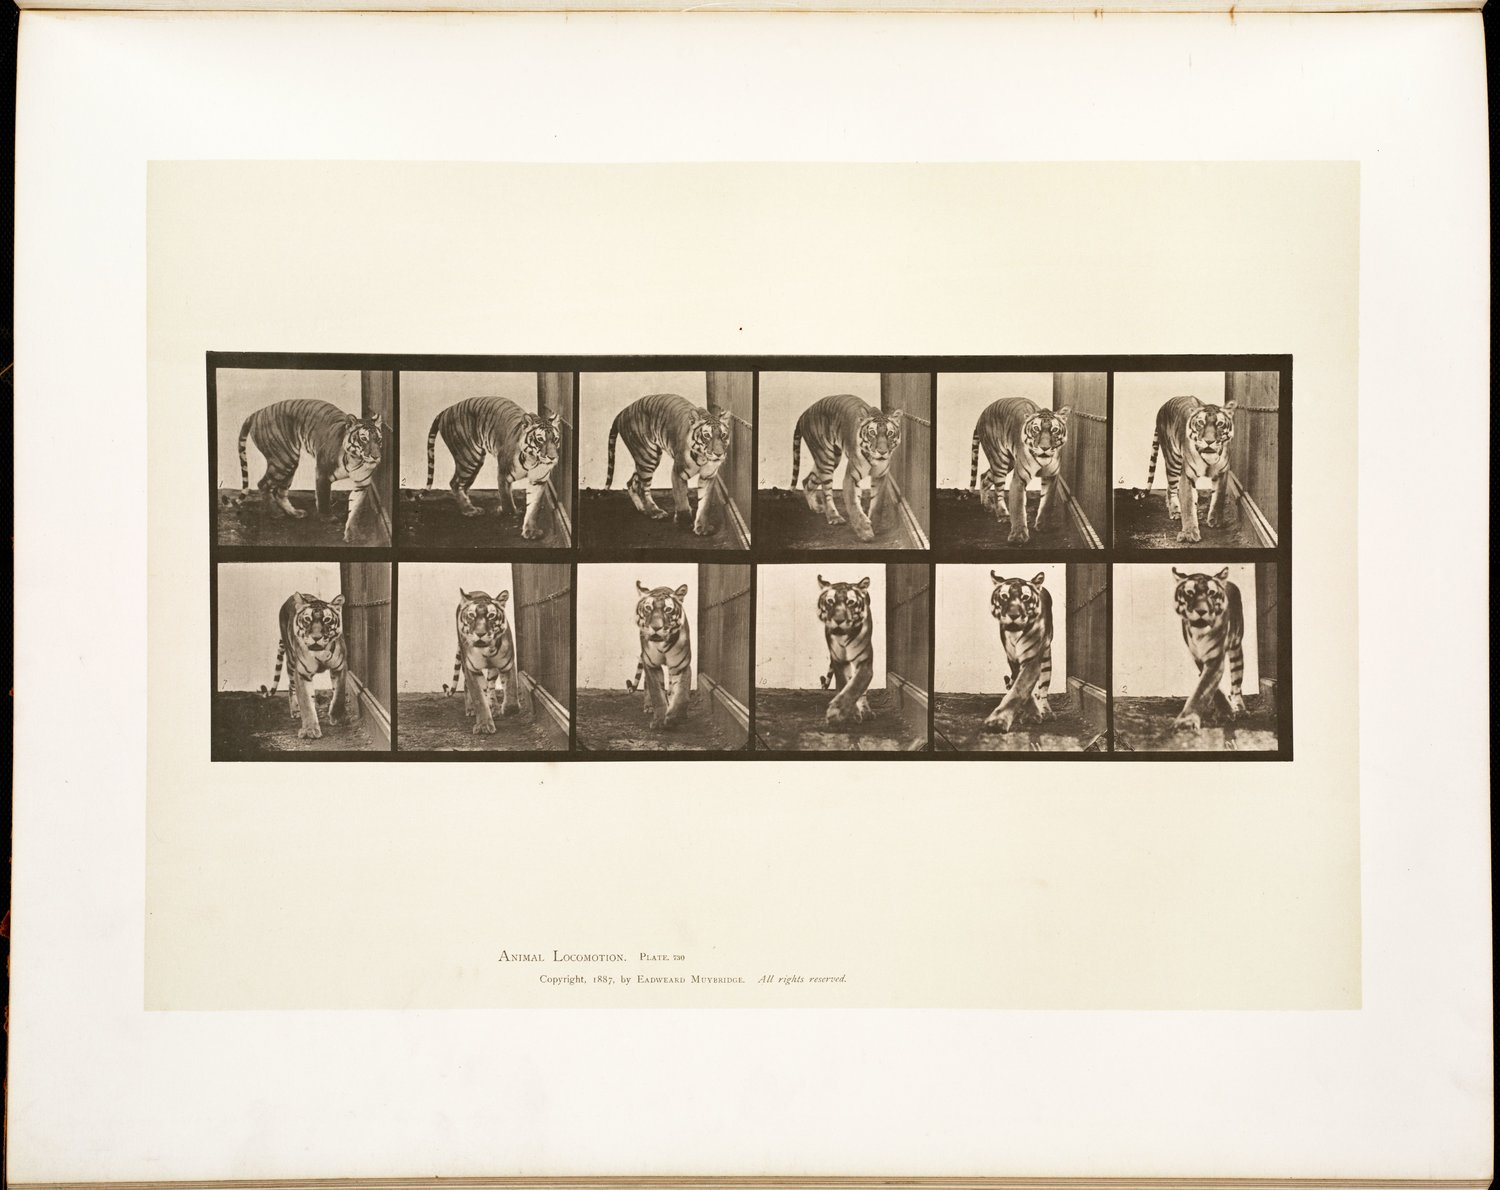 Though Muybridge produced tens of thousands of images in the 13 years he undertook photographic studies on animal movements, he eventually published an 11-volume set of 781 plates. Here are just a few that are on view at the New Bedford Art Museum City Gallery until Jan. 22, 2022.